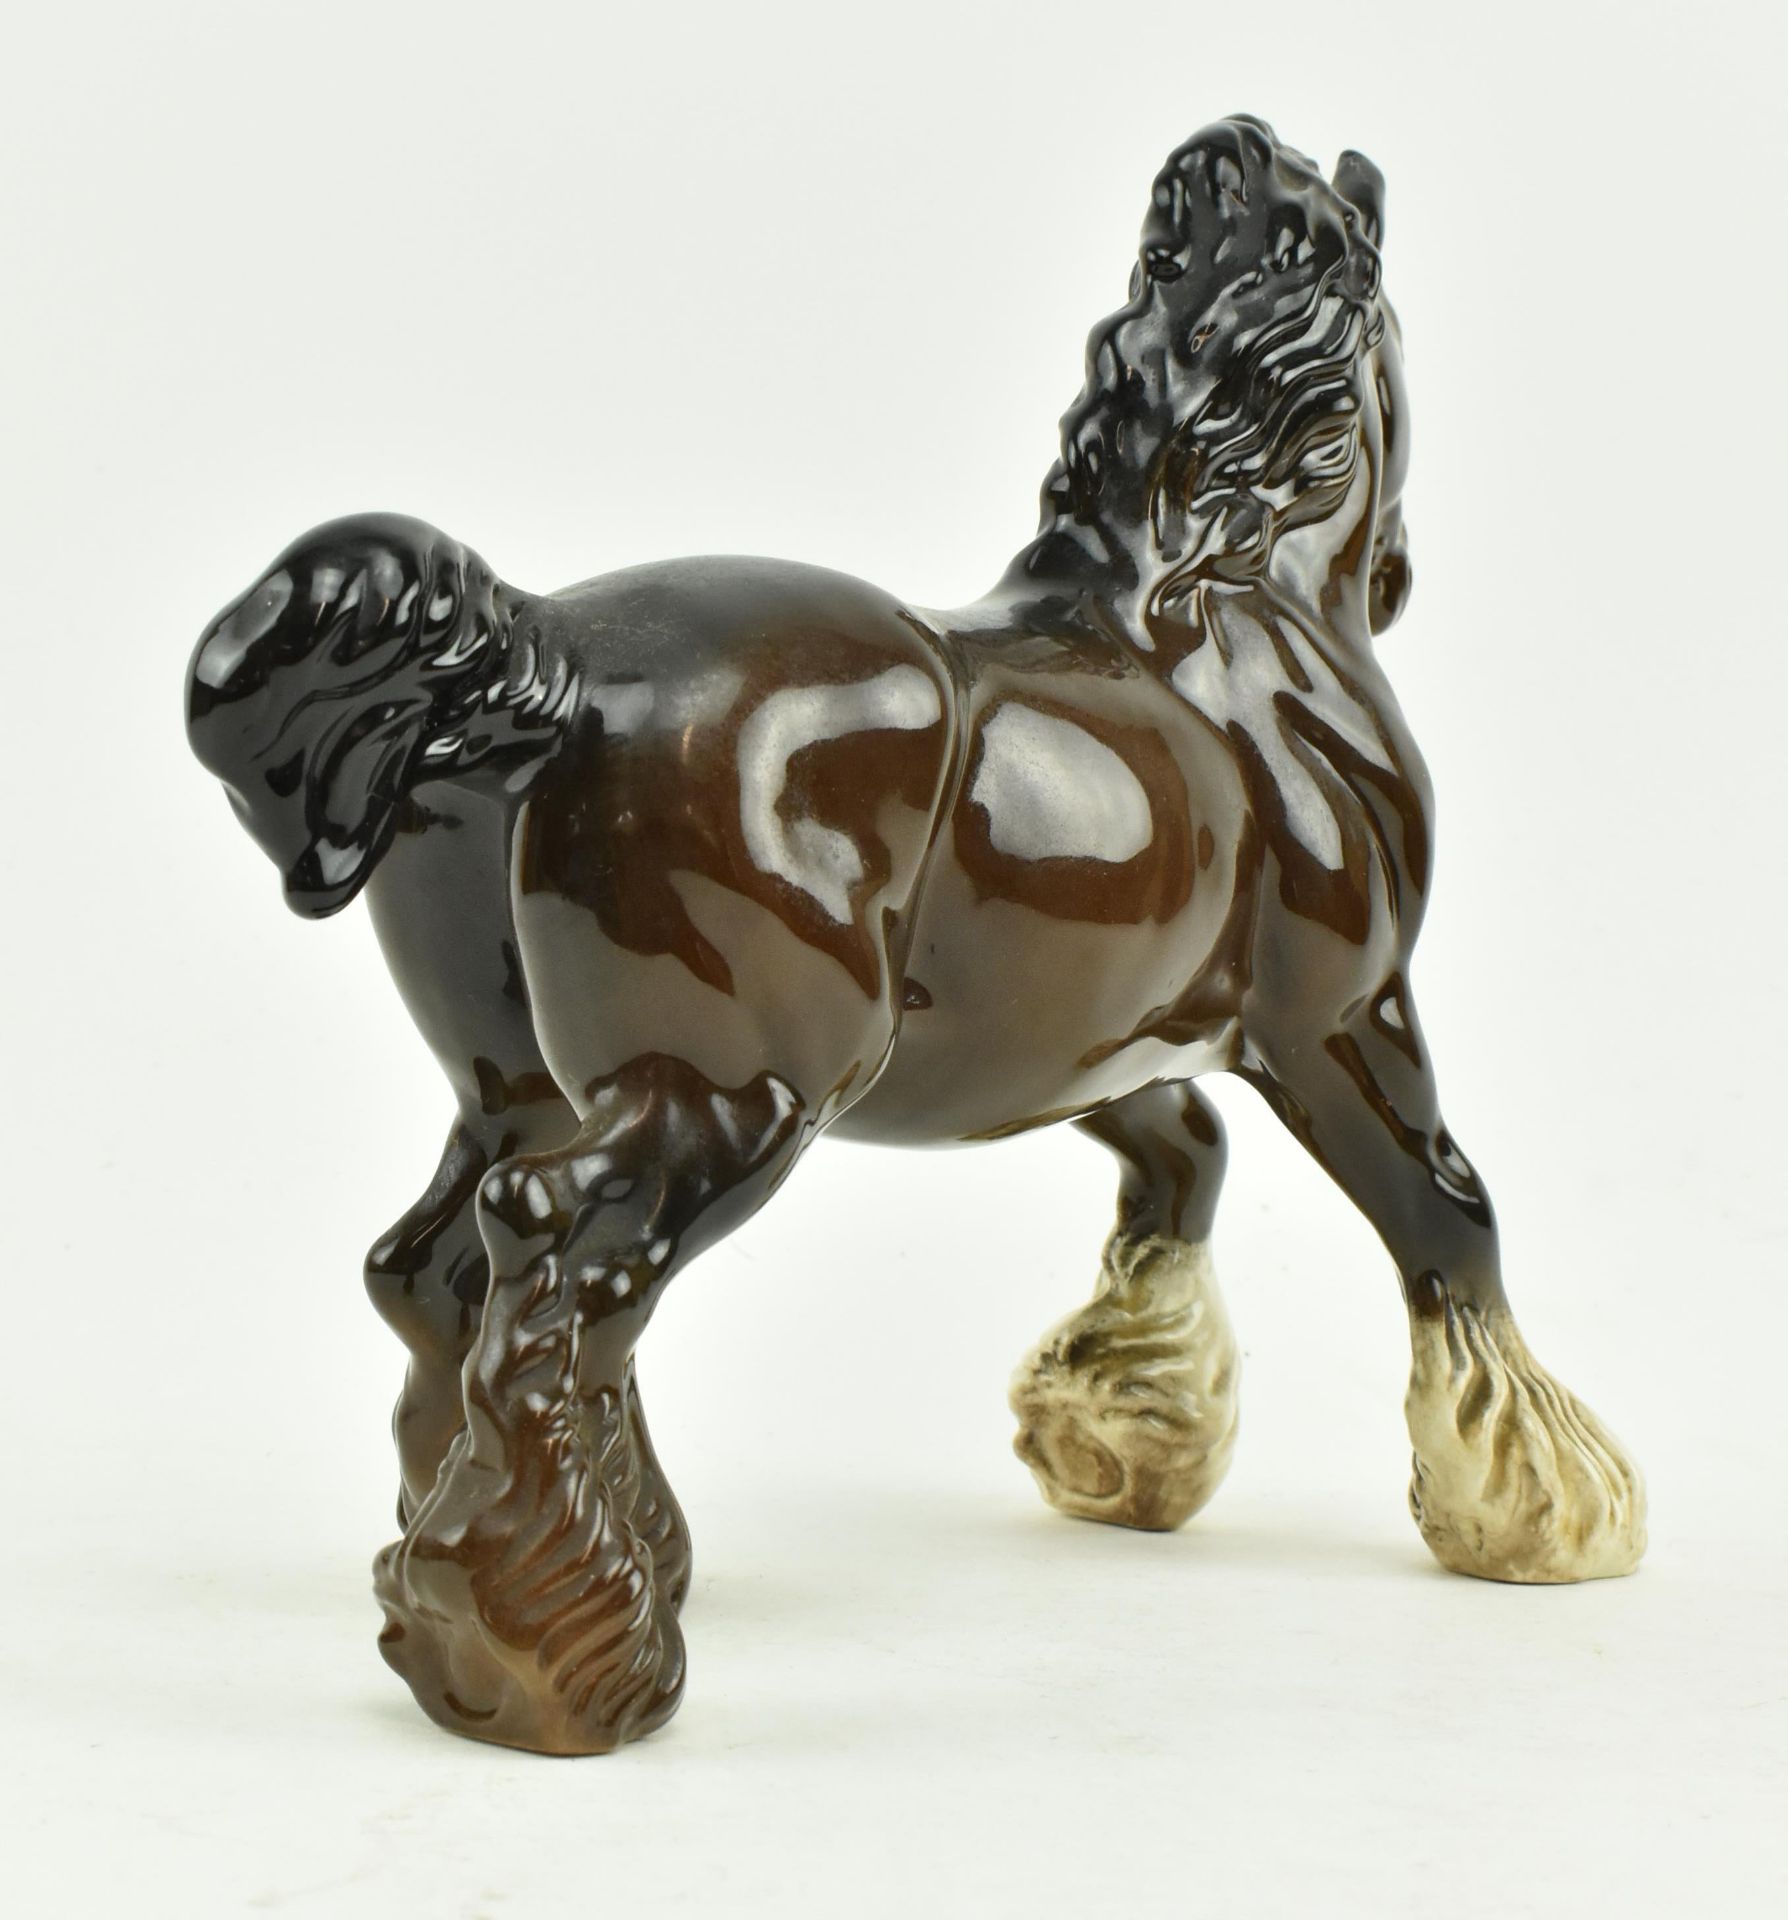 BESWICK - 20TH CENTURY PORCELAIN FIGURINE OF A SHIRE HORSE - Image 2 of 4